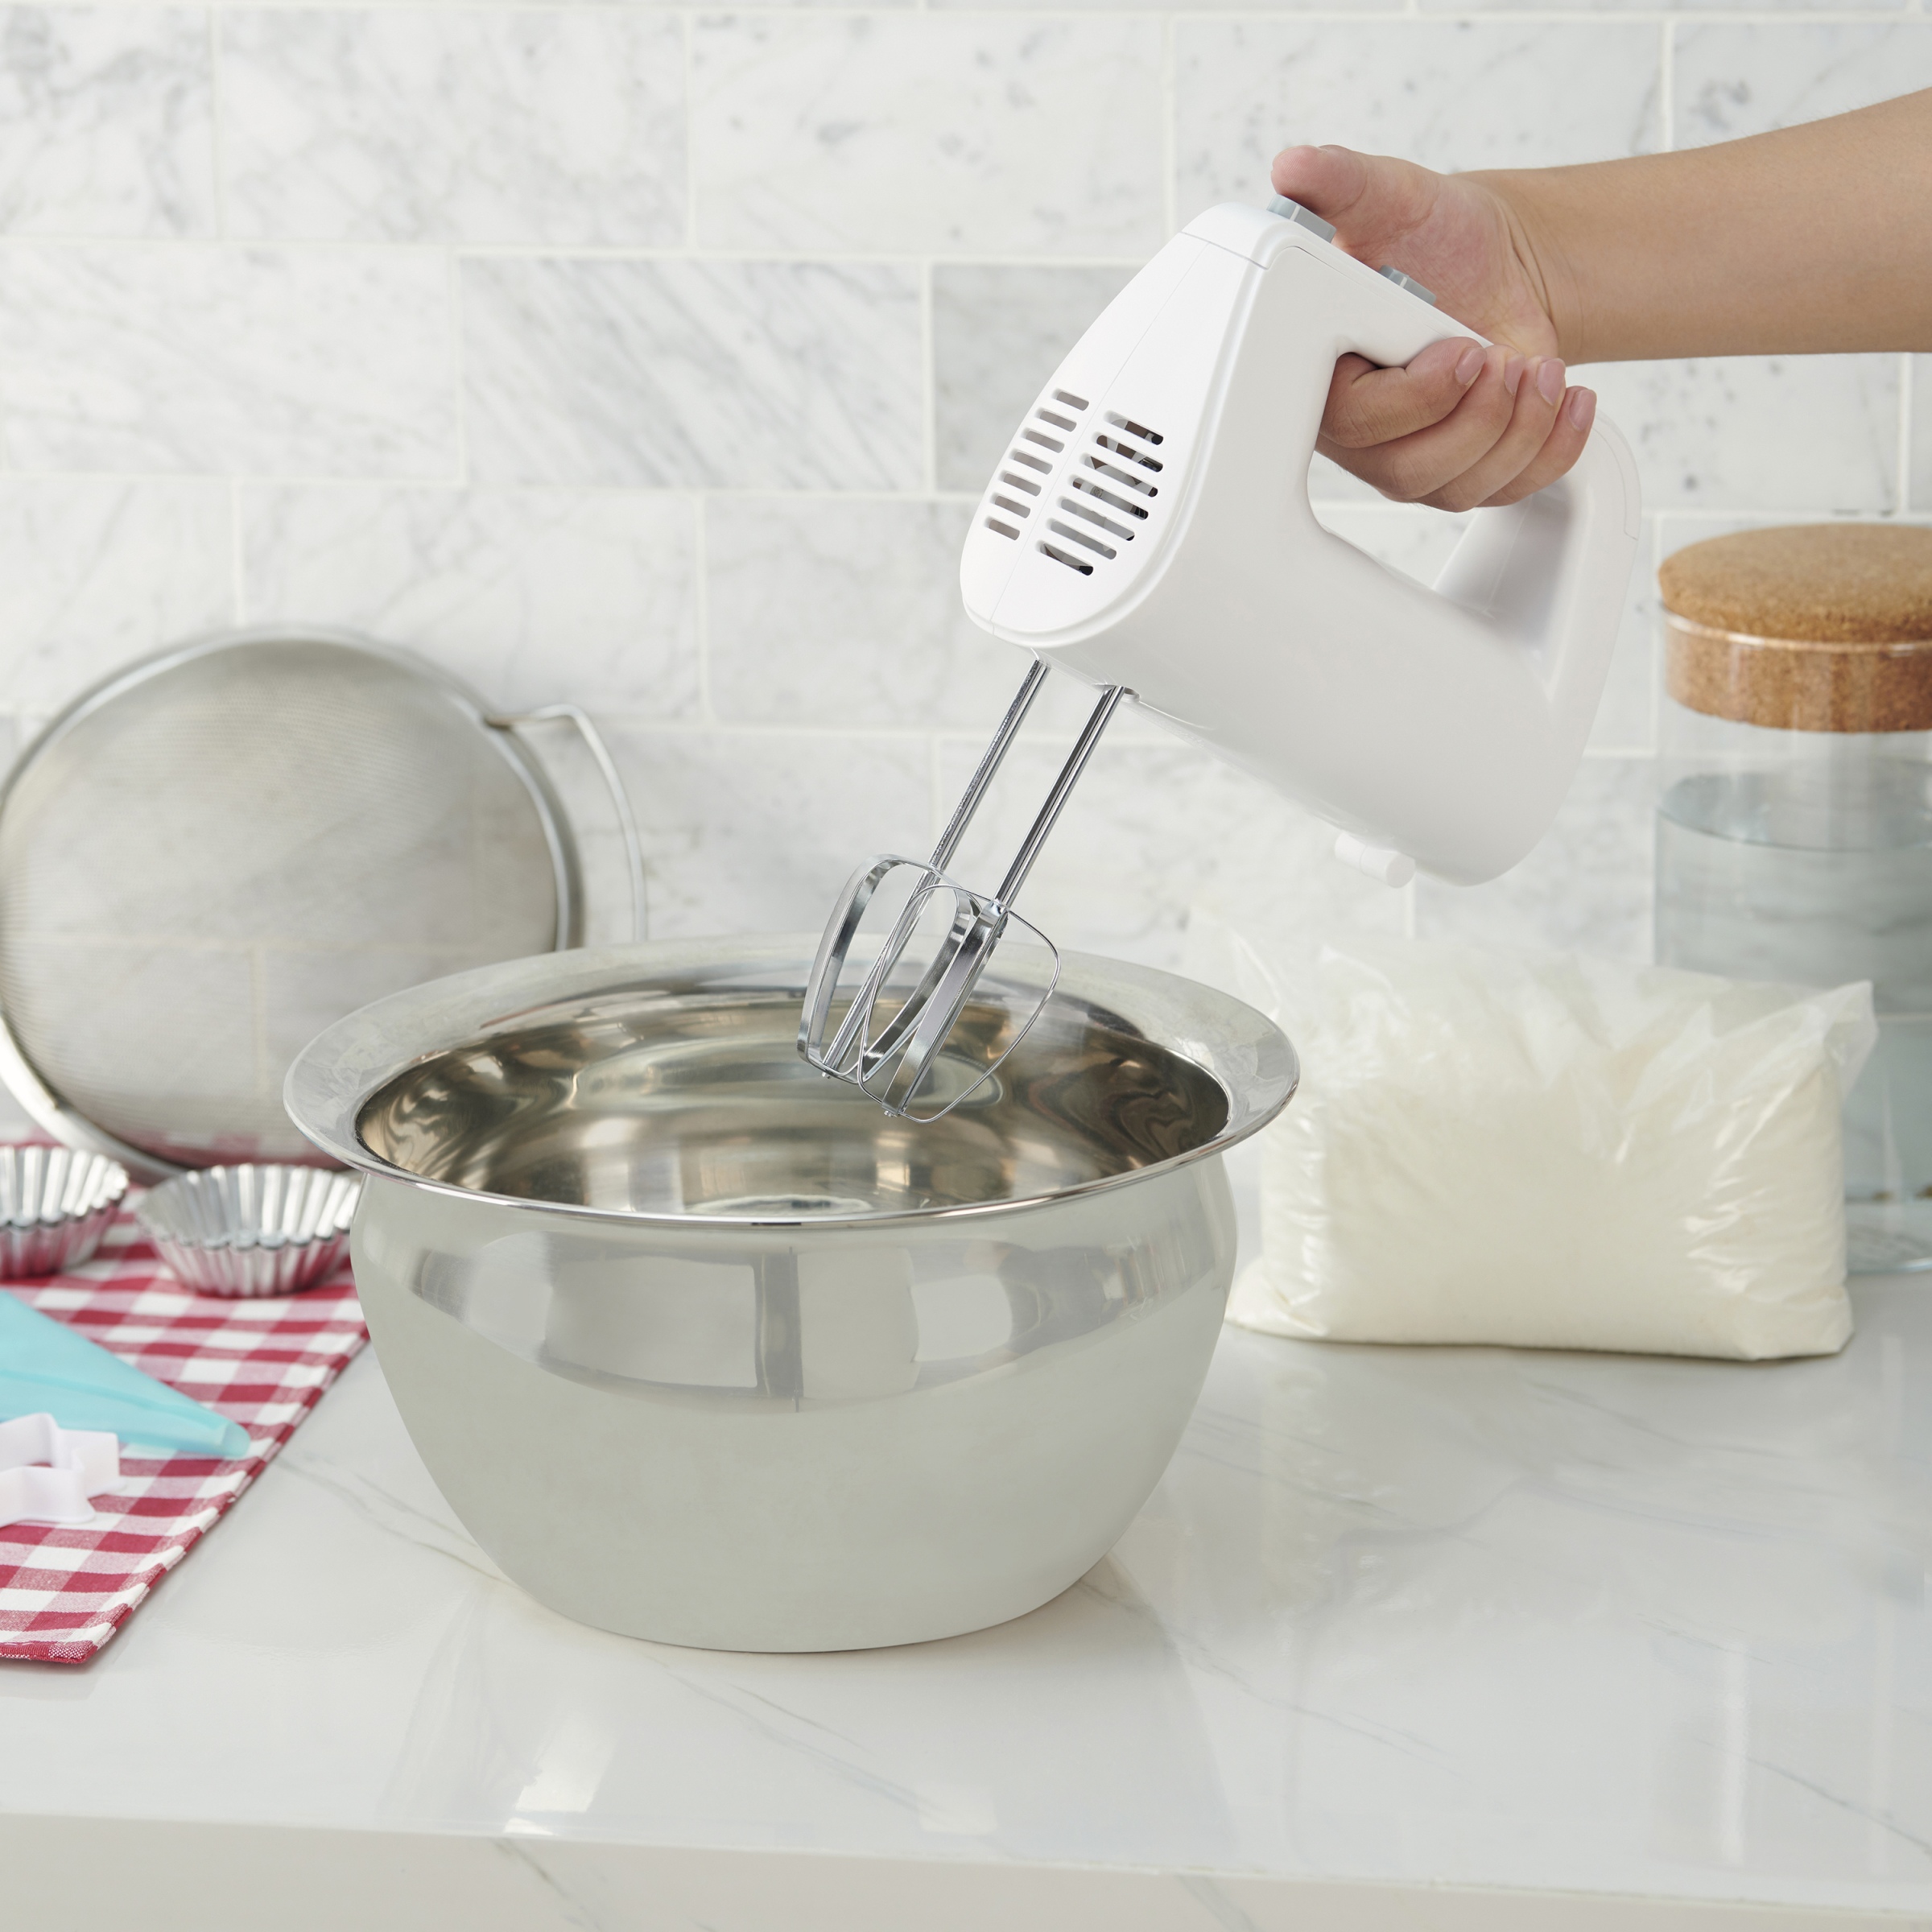 Mainstays 5-Speed 150-Watts Hand Mixer with Chrome Beaters, White - image 3 of 5